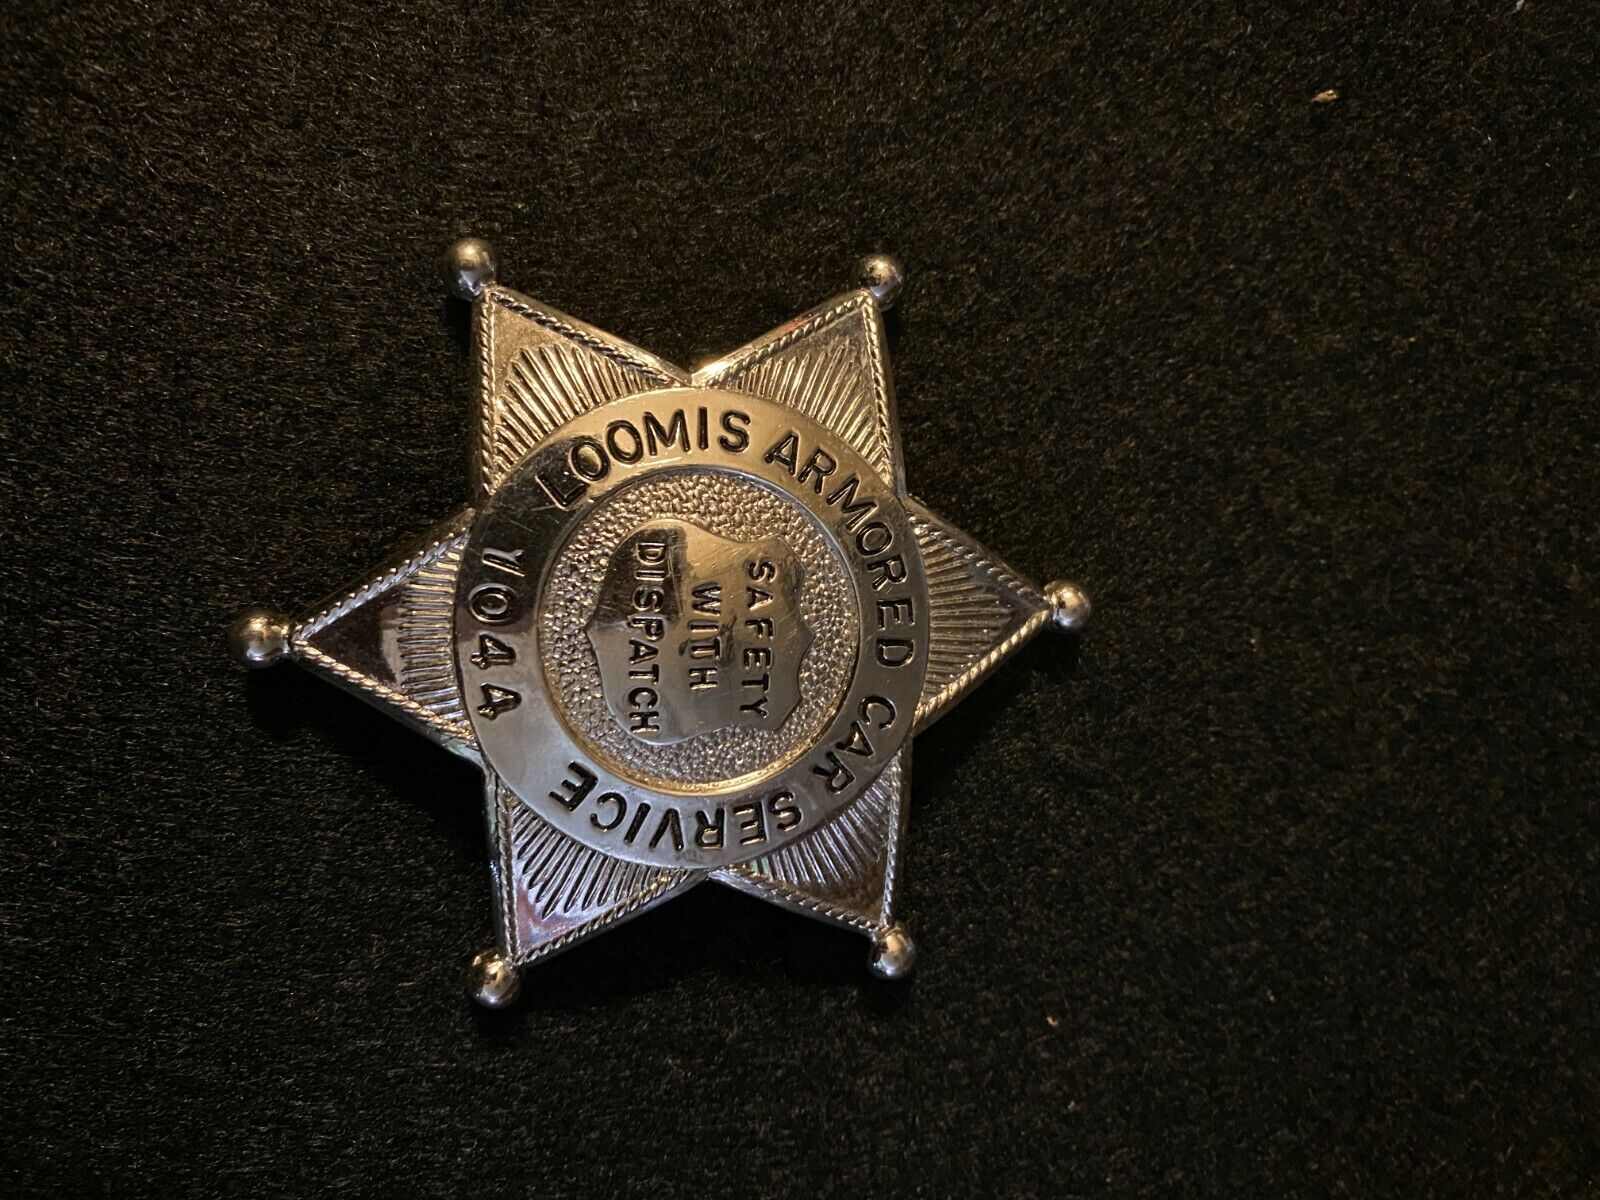 LOOMIS ARMORED SERVICE SIX POINT BALL TIP  Badge POLICE-SECURITY Obsolete